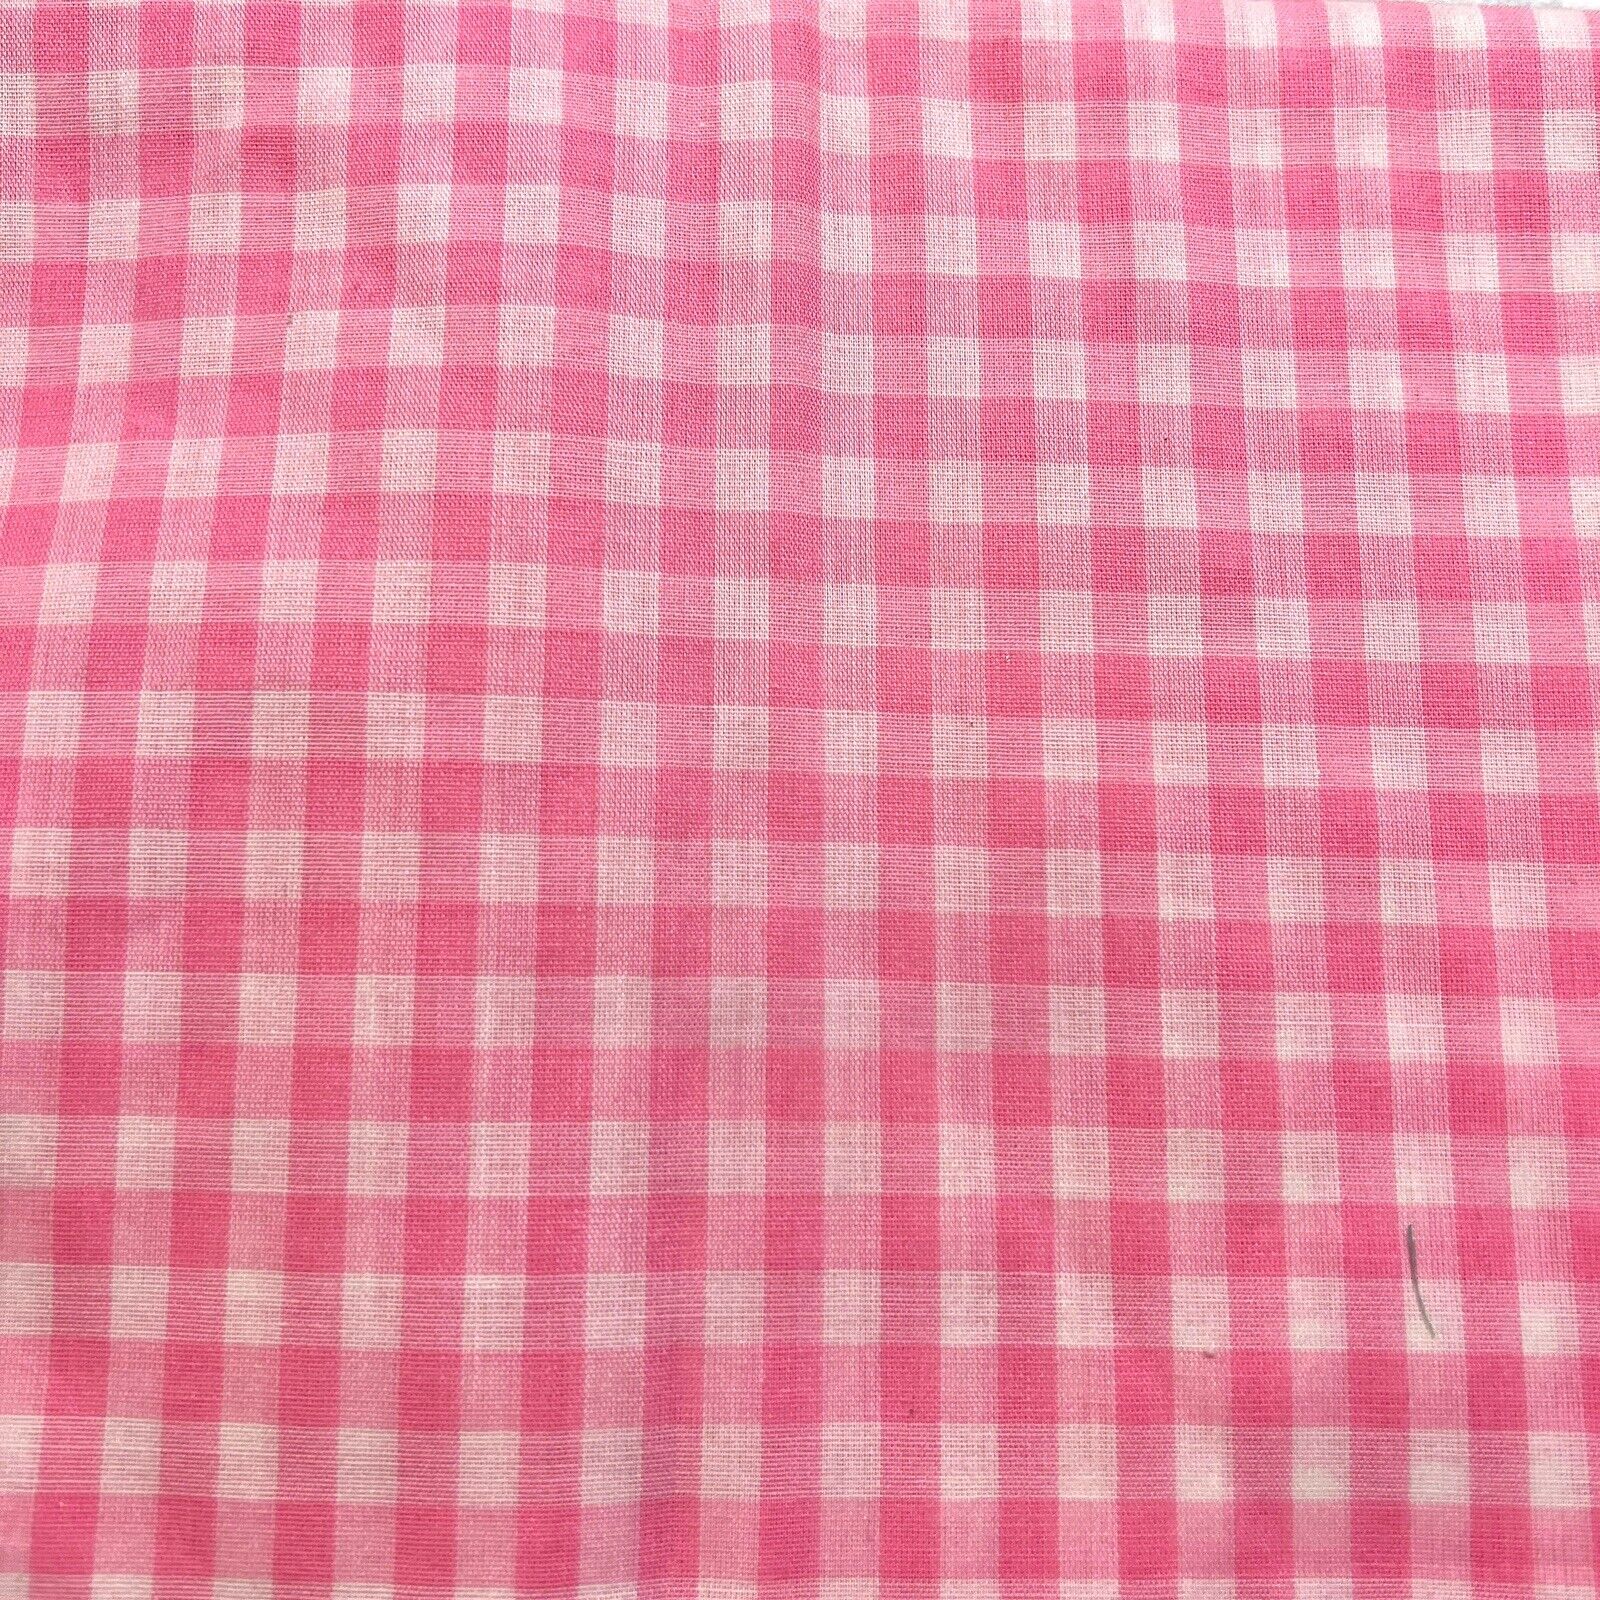 Vintage Cotton Fabric Gingham Check Pink 1/4” Block 1/2  yard X 38 Inches